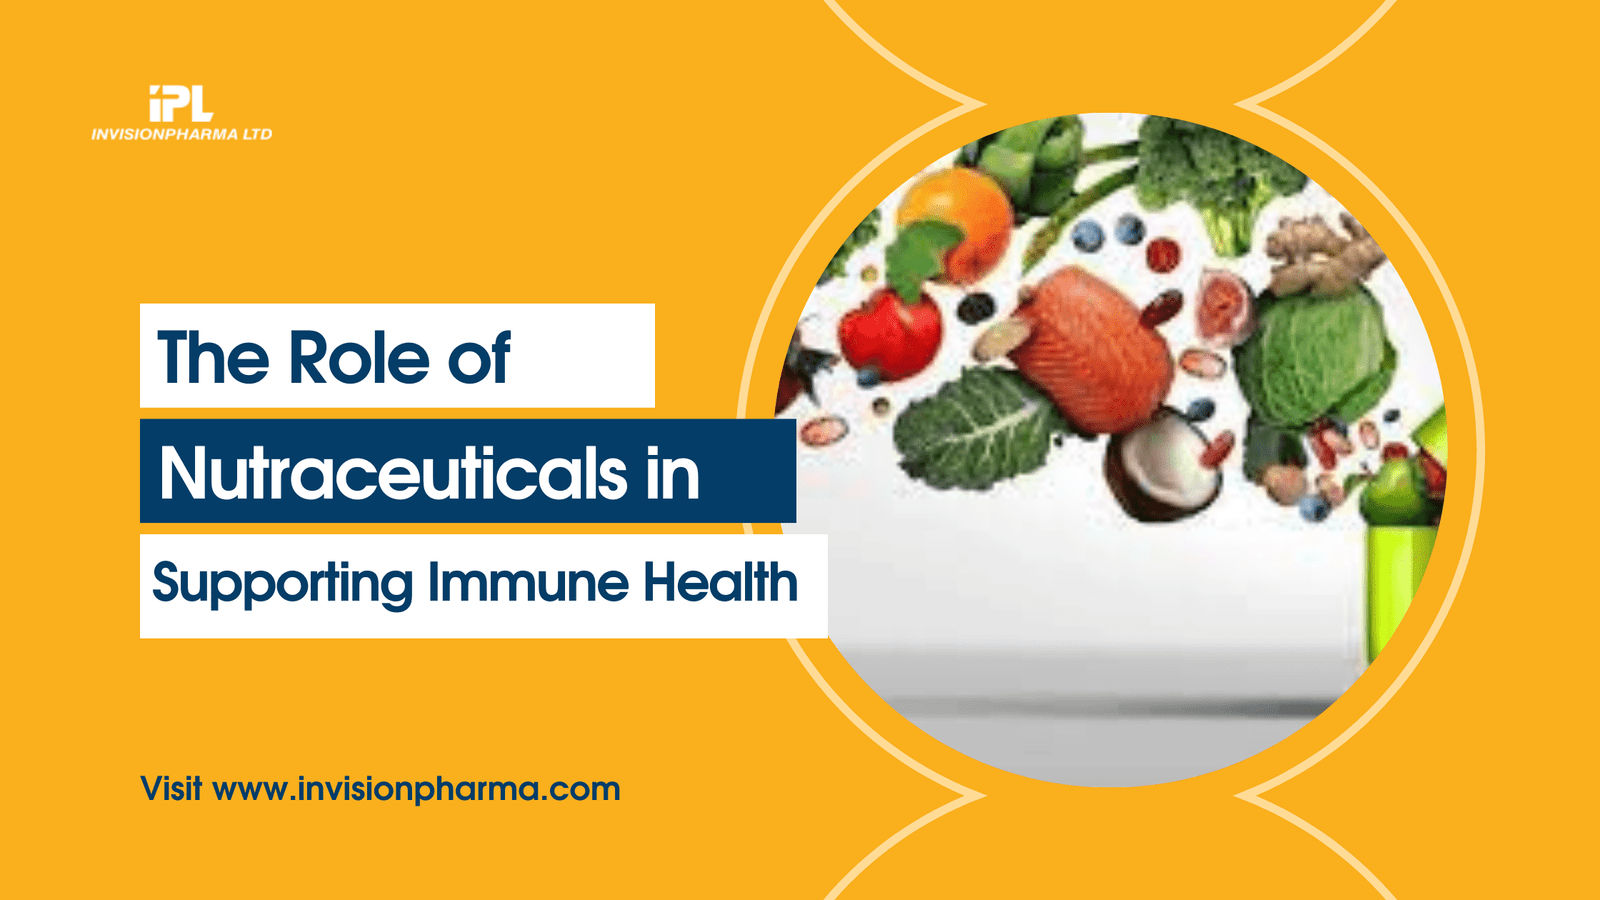 The Role of Nutraceuticals in Supporting Immune Health